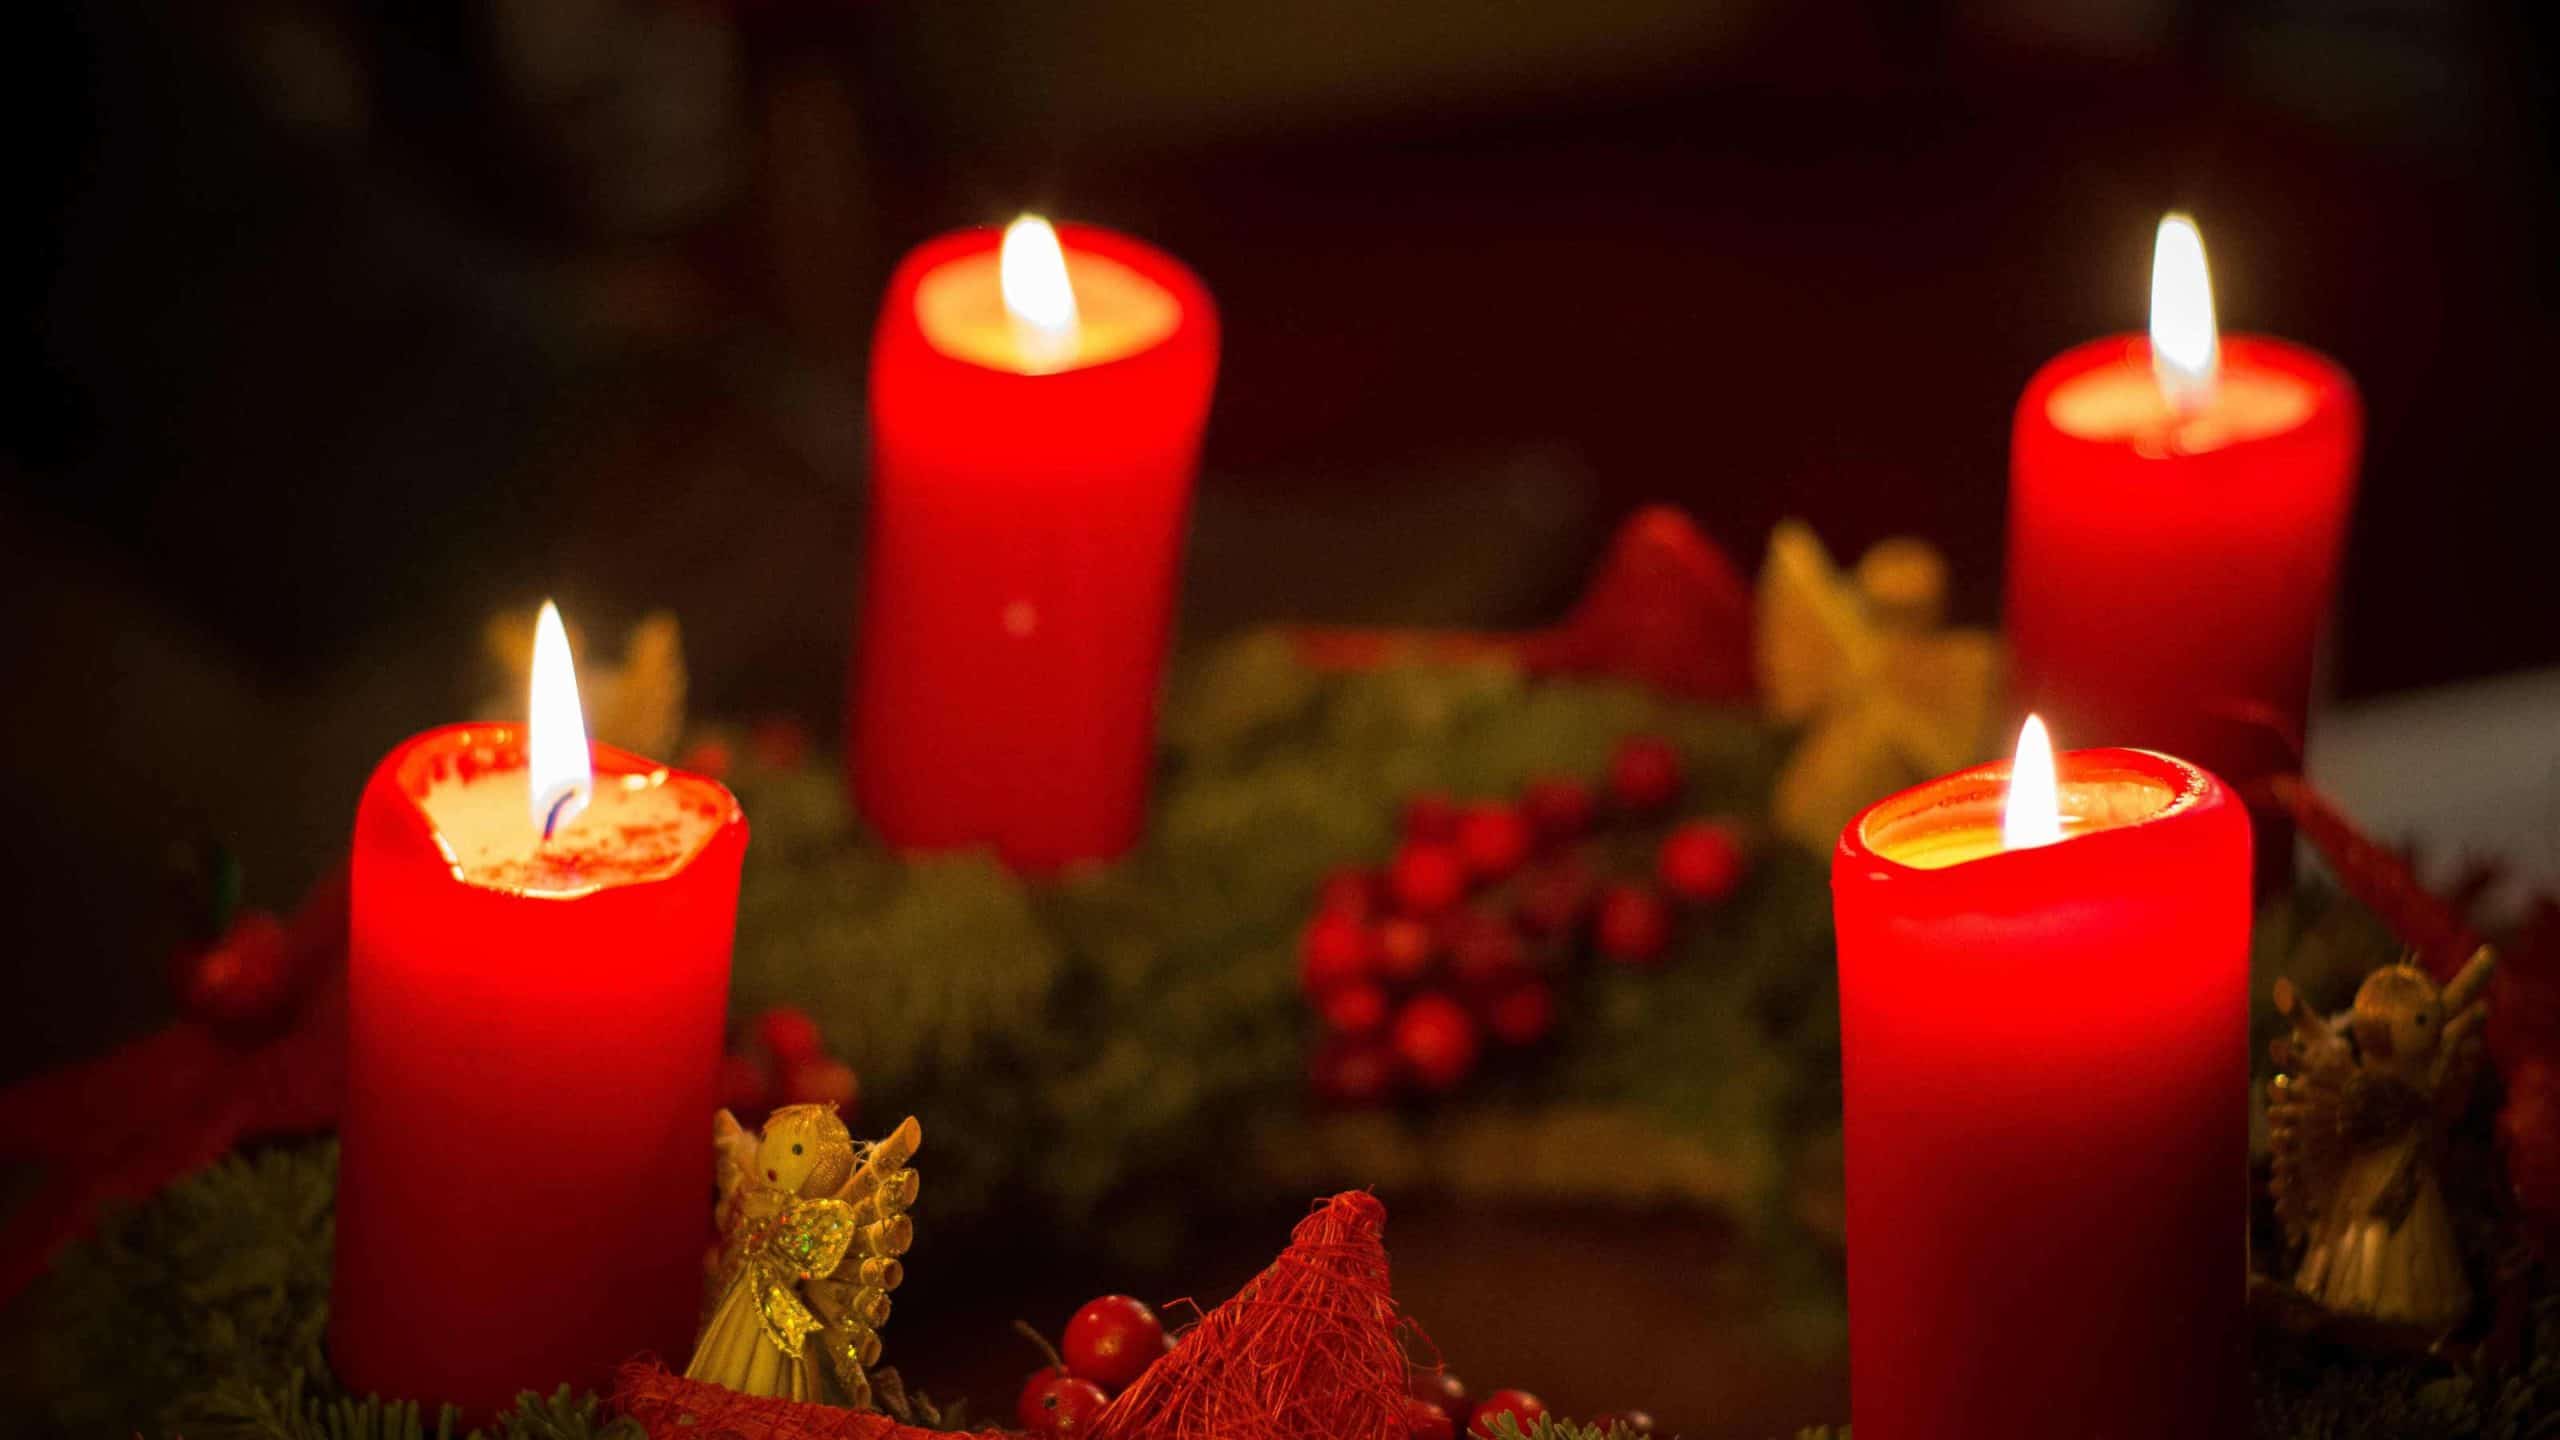 Candles burn with evergreens and red berries.